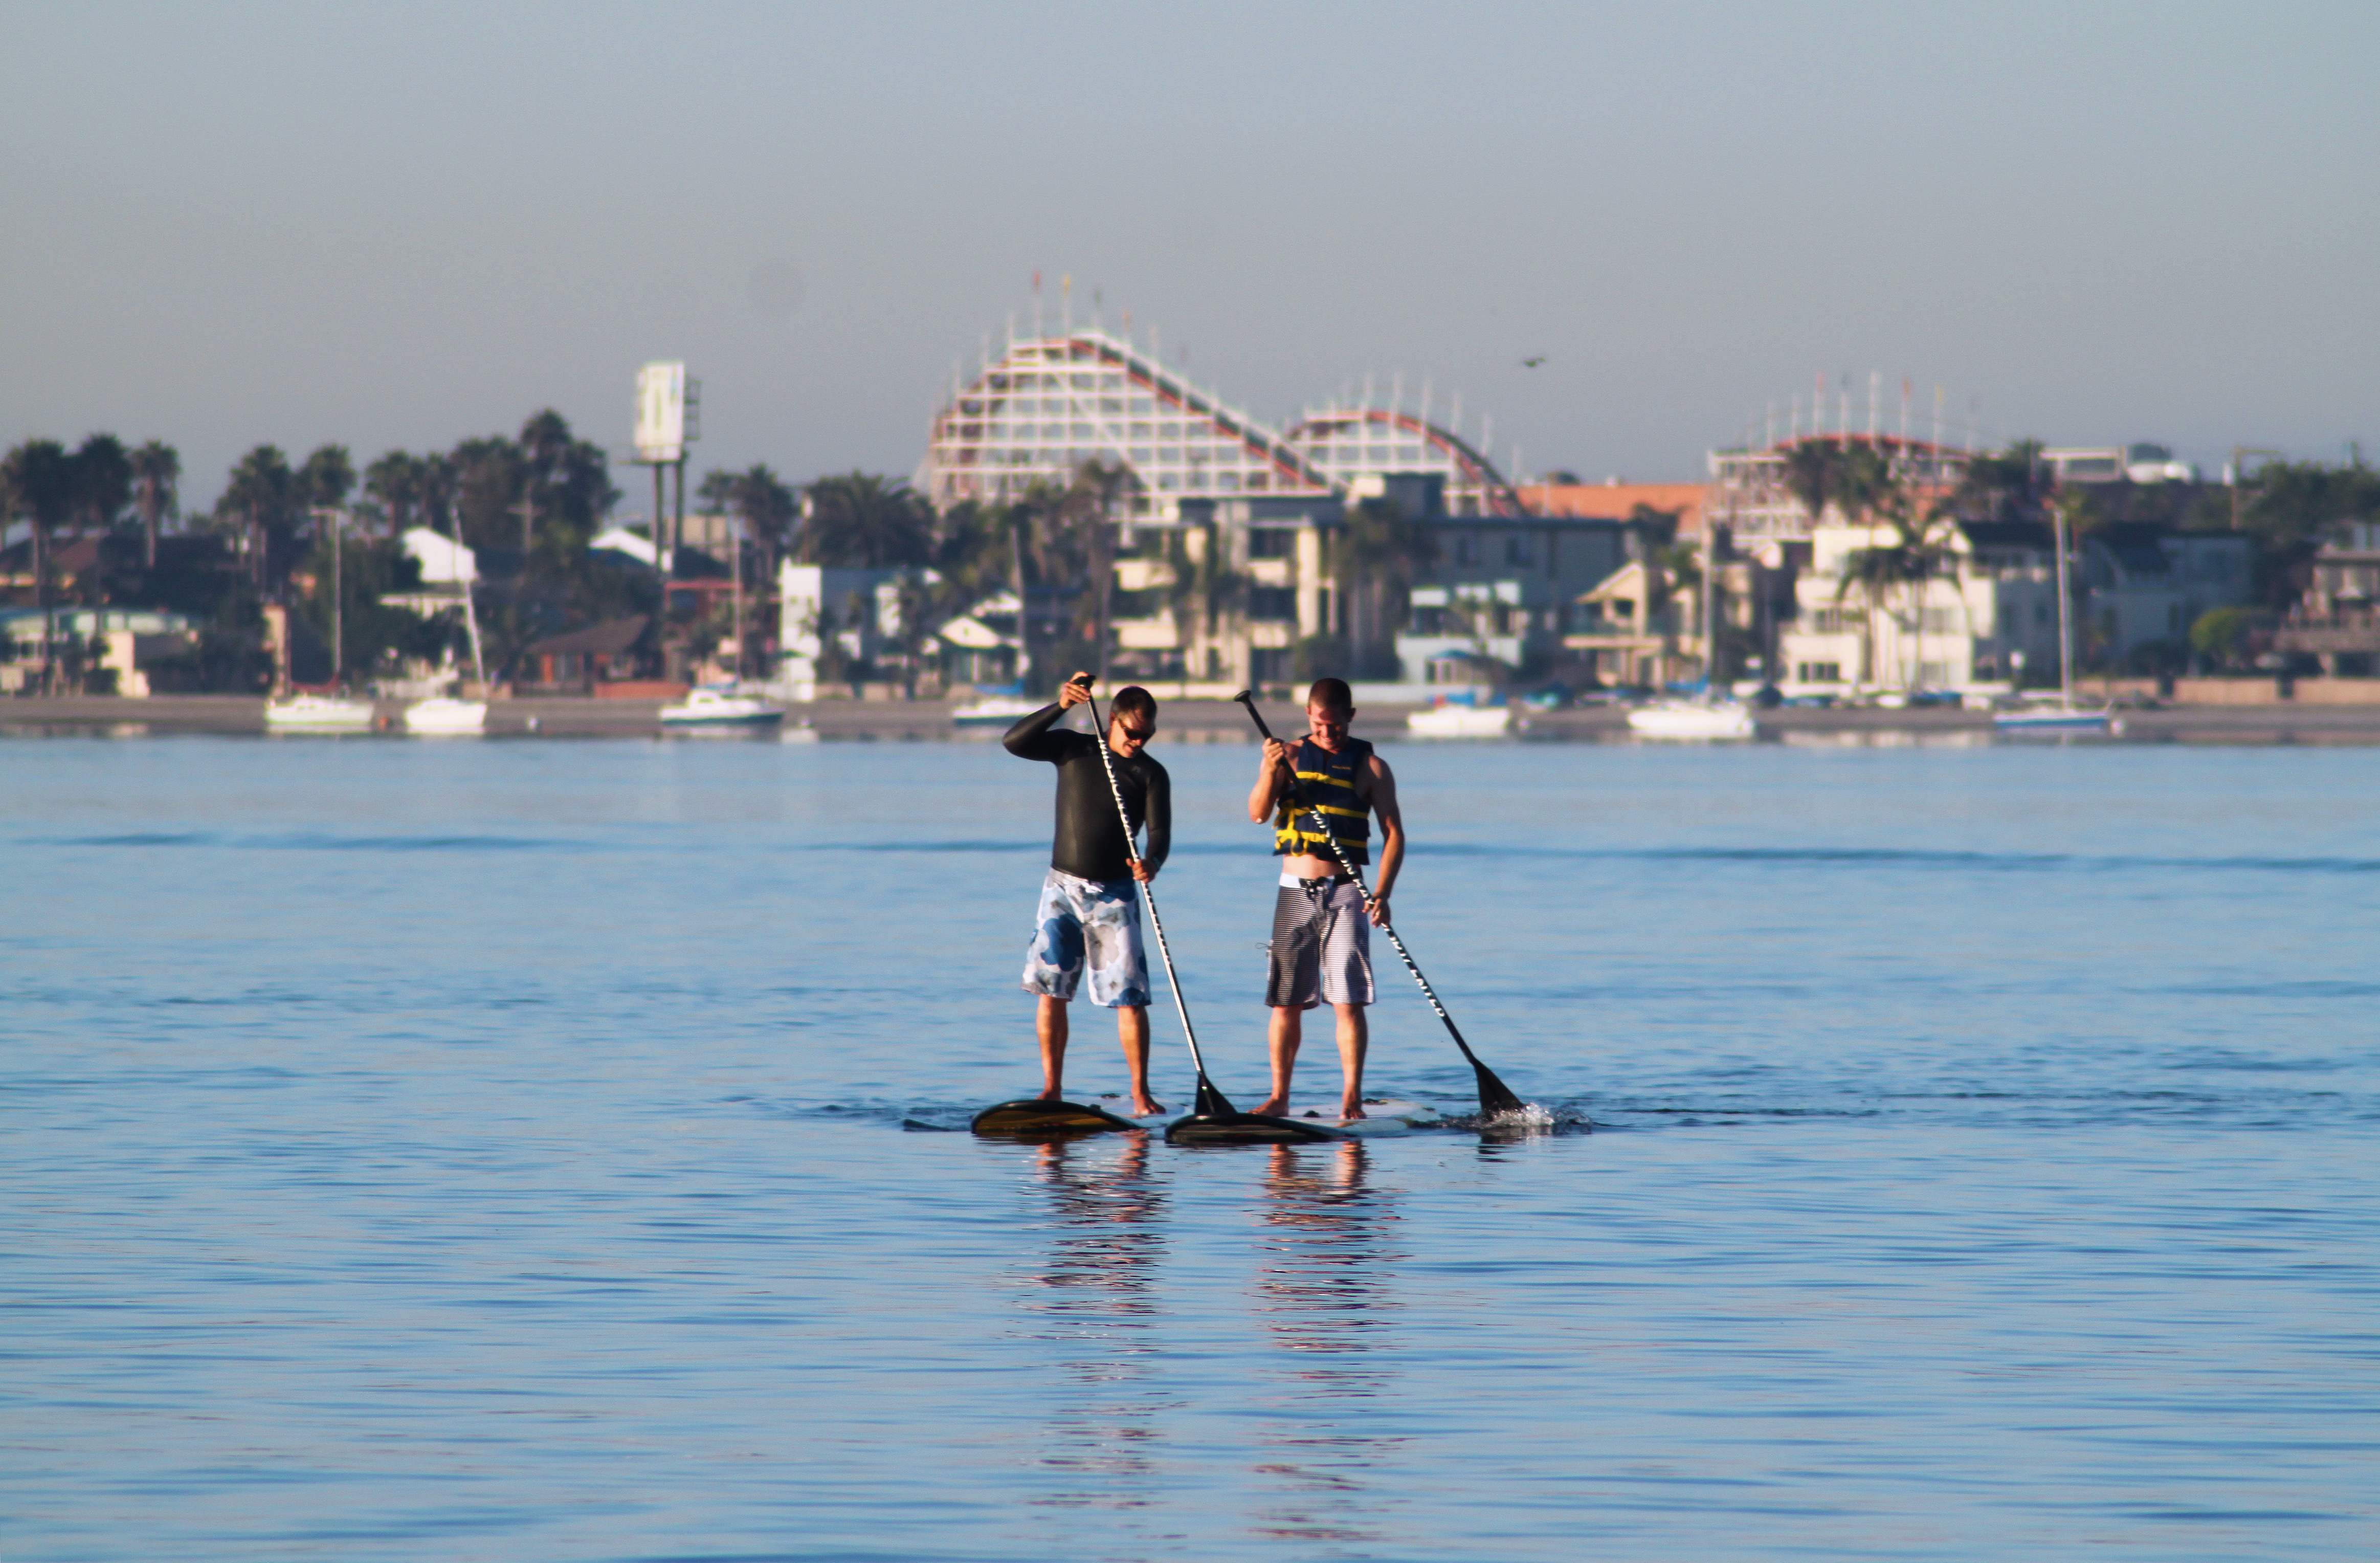 Paddleboarders on Mission Bay